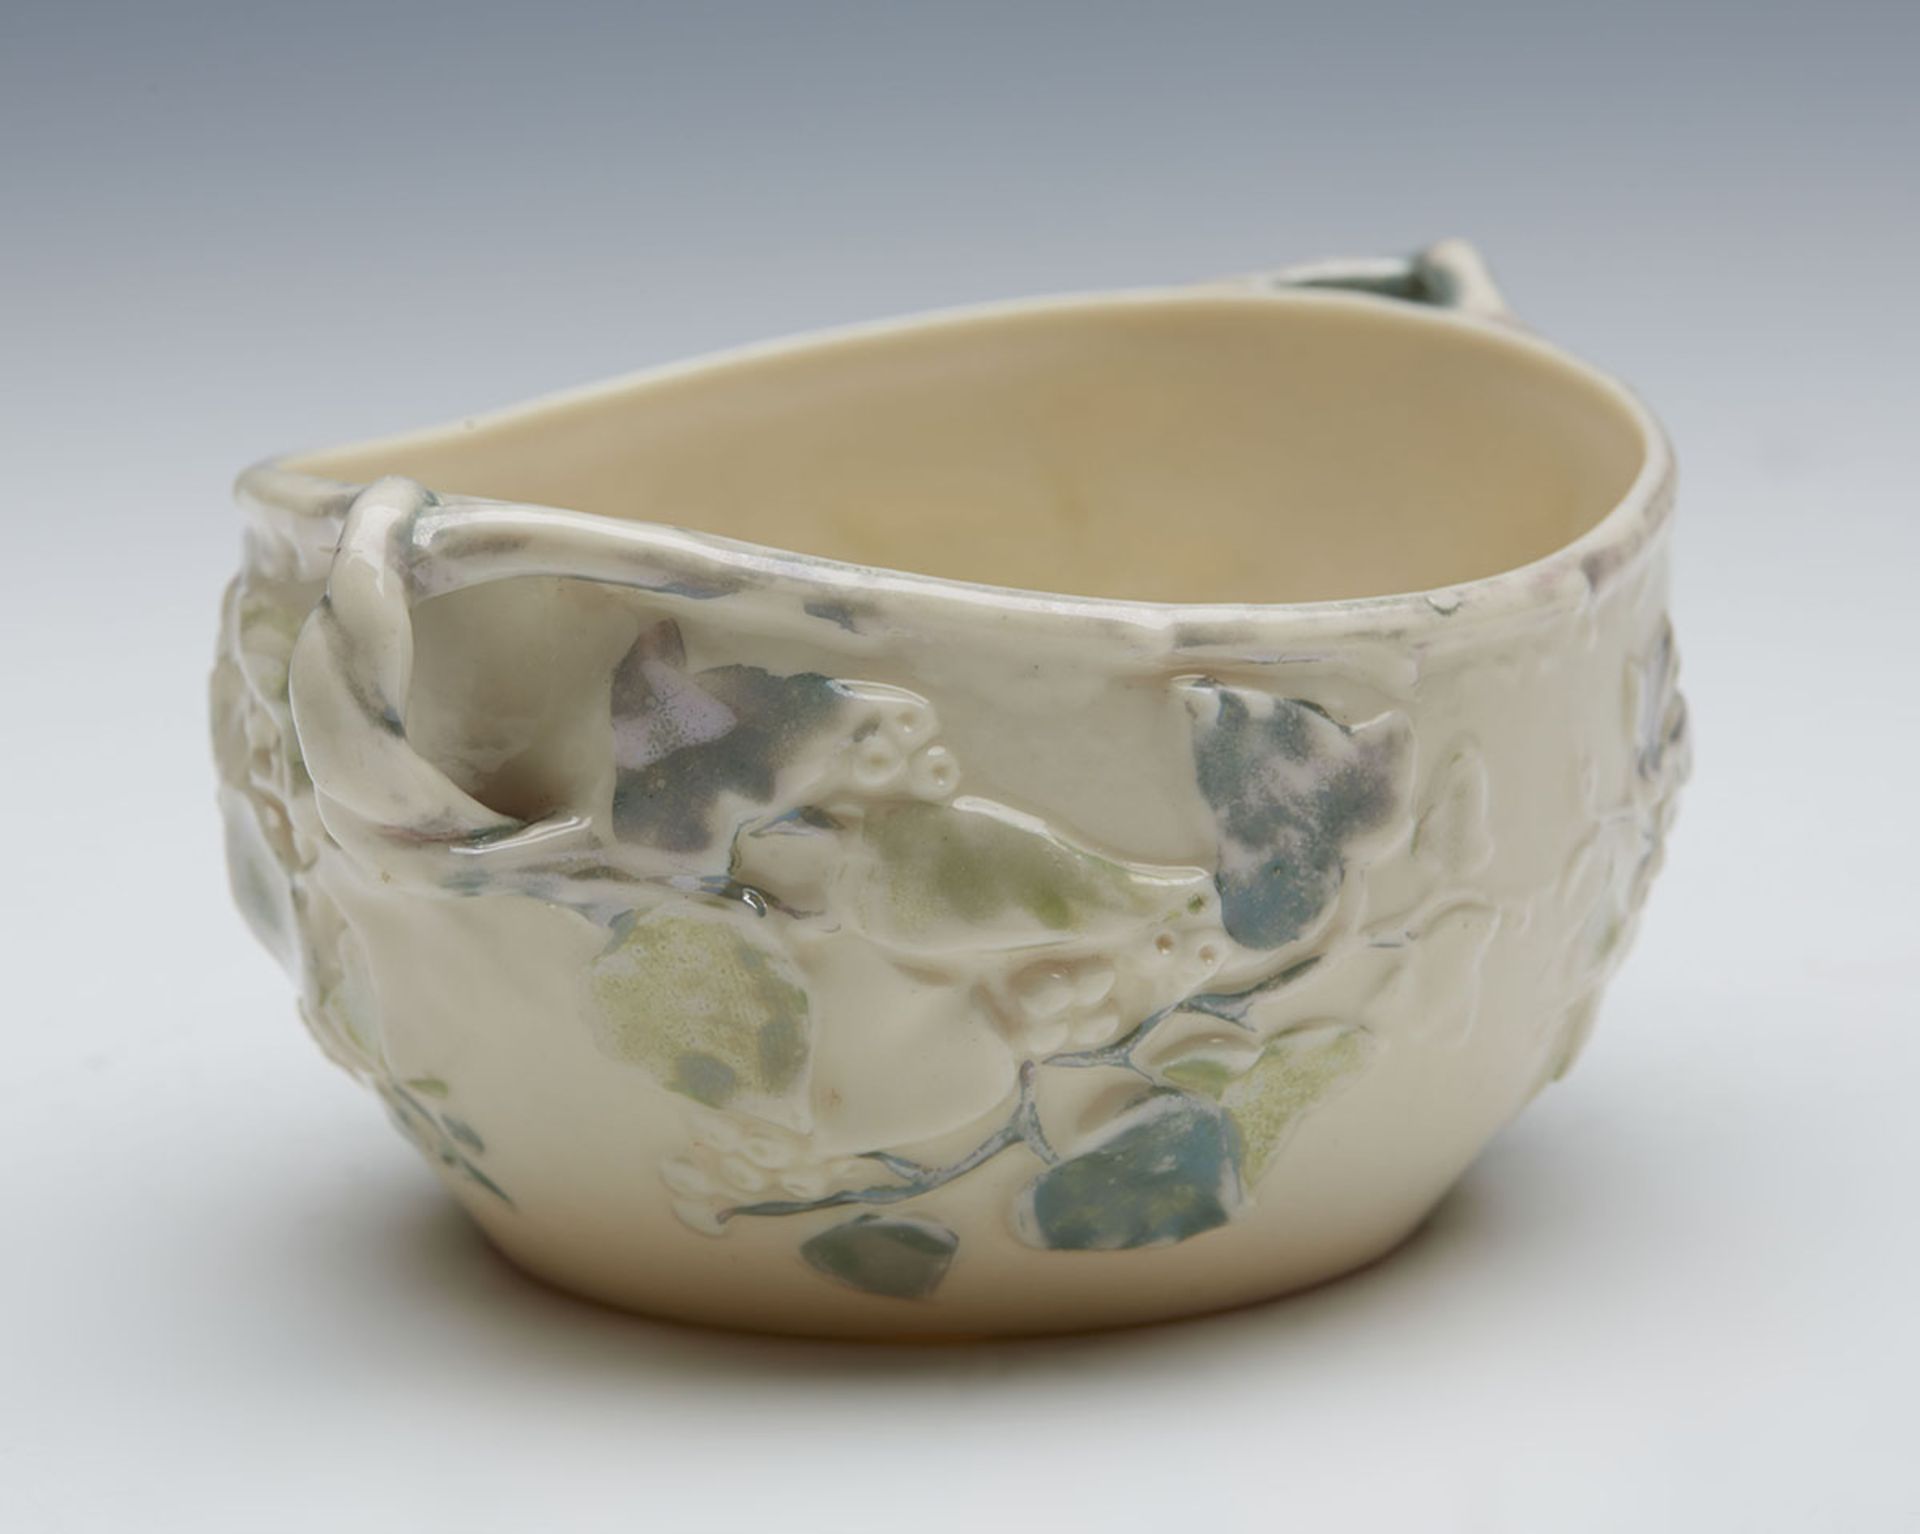 ANTIQUE BELLEEK 2ND PERIOD LUSTRE GLAZED BOWL 1891-1926   DIMENSIONS   Height 5,5cm, Width 12, - Image 5 of 7